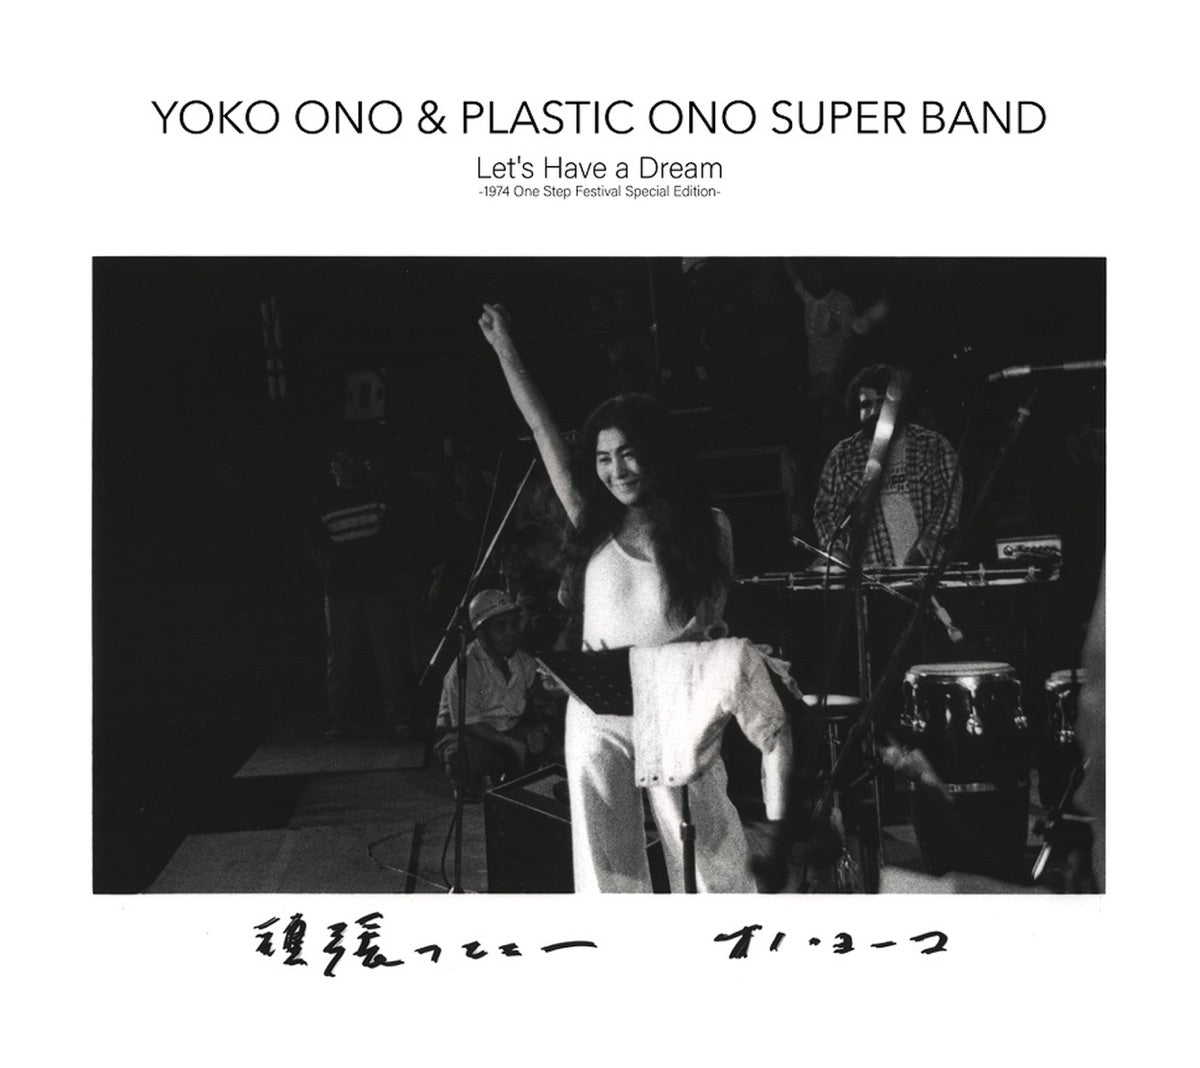 Yoko Ono & Plastic Ono Super Band - Let's Have a Dream (1974 One Step Festival Special Edition)